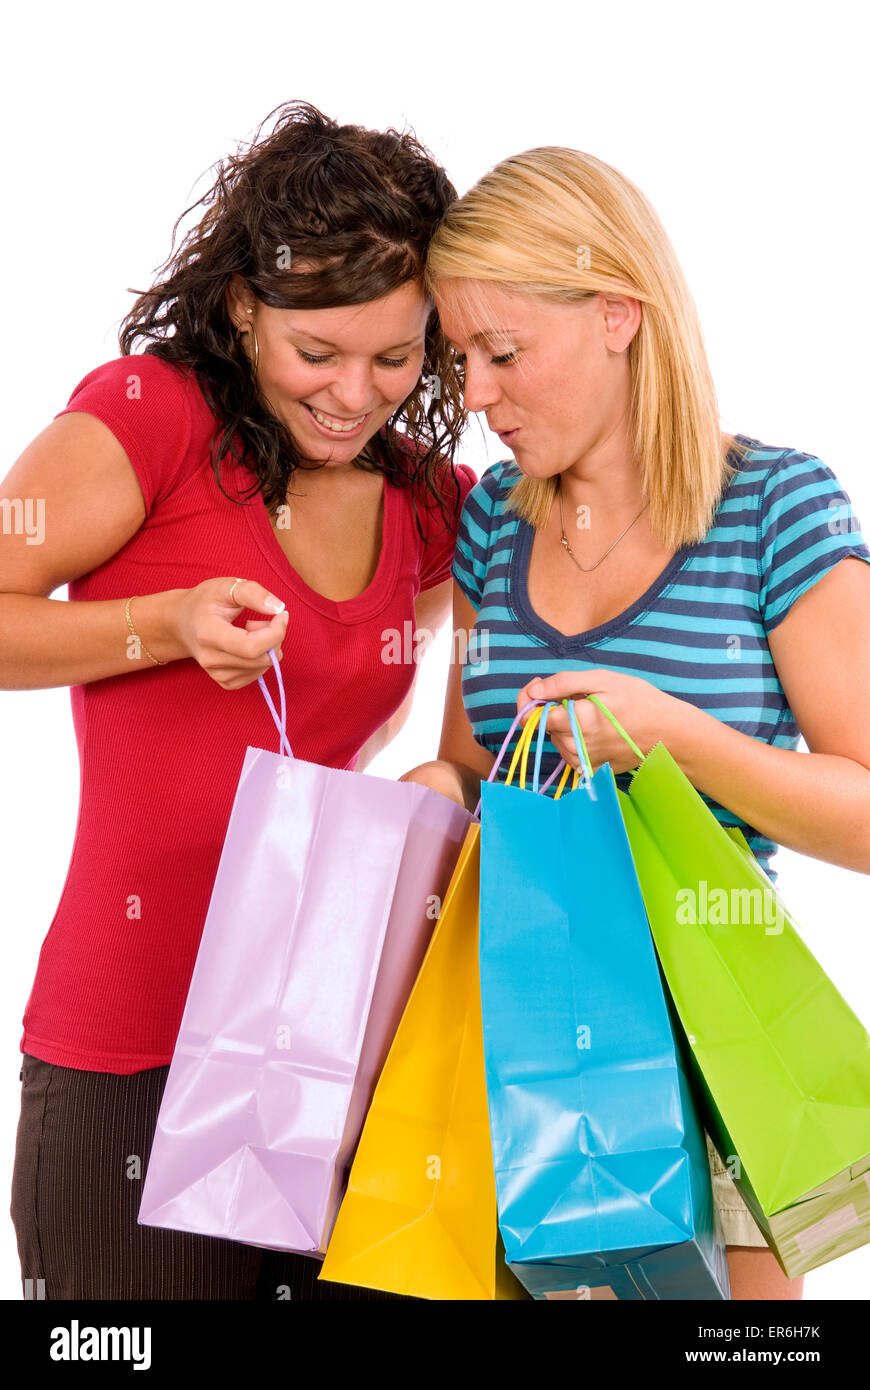 Look what I bought. Two girls looking in each other's shopping bags on white background Stock Photo